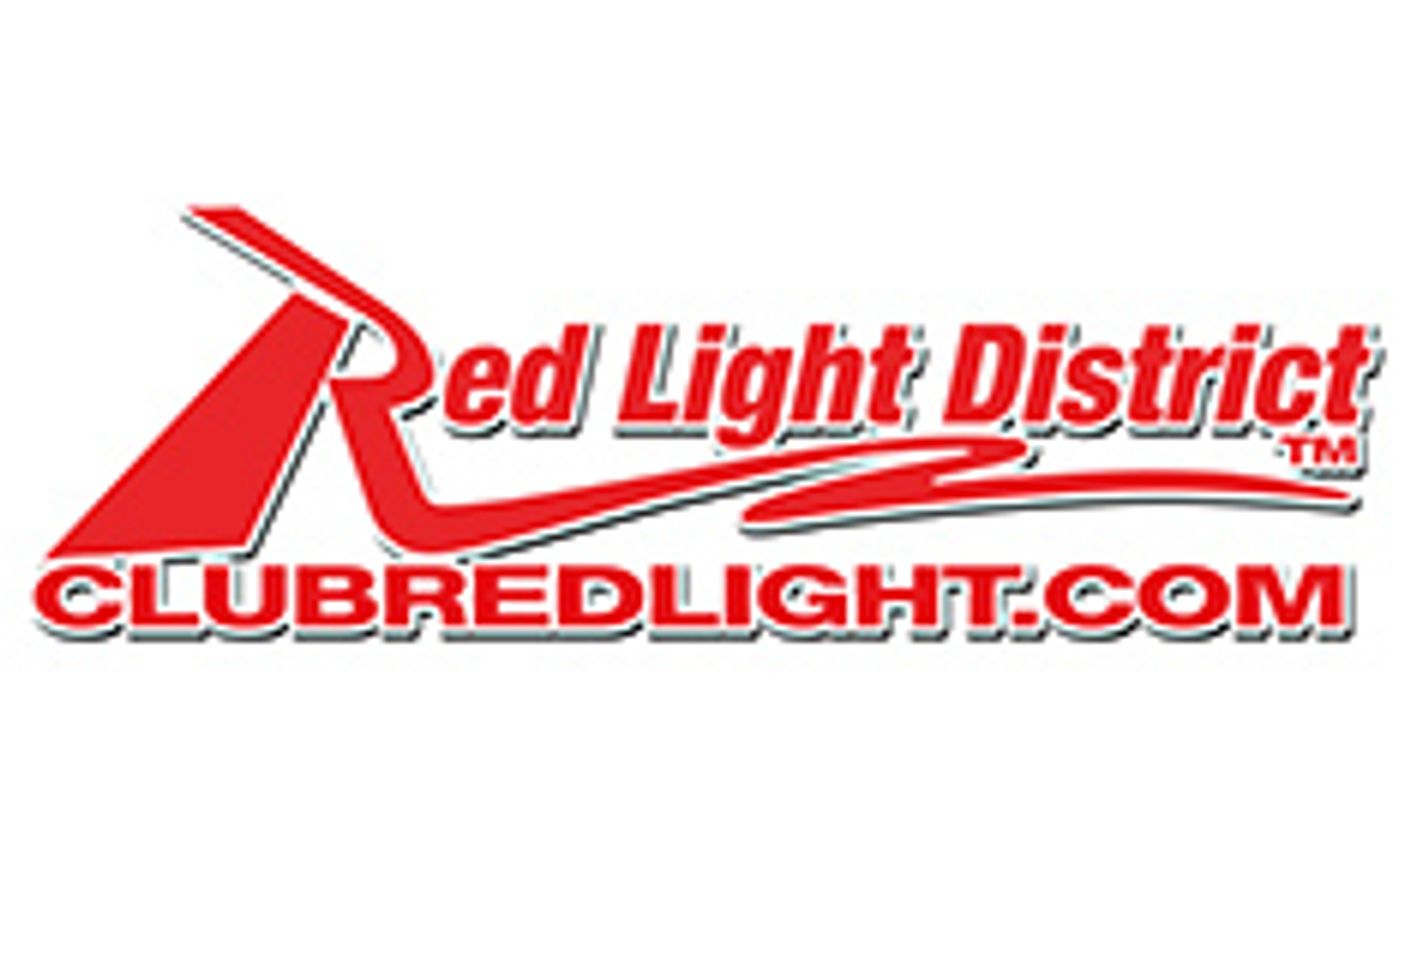 Red Light District to Host Party During Webmaster Access West